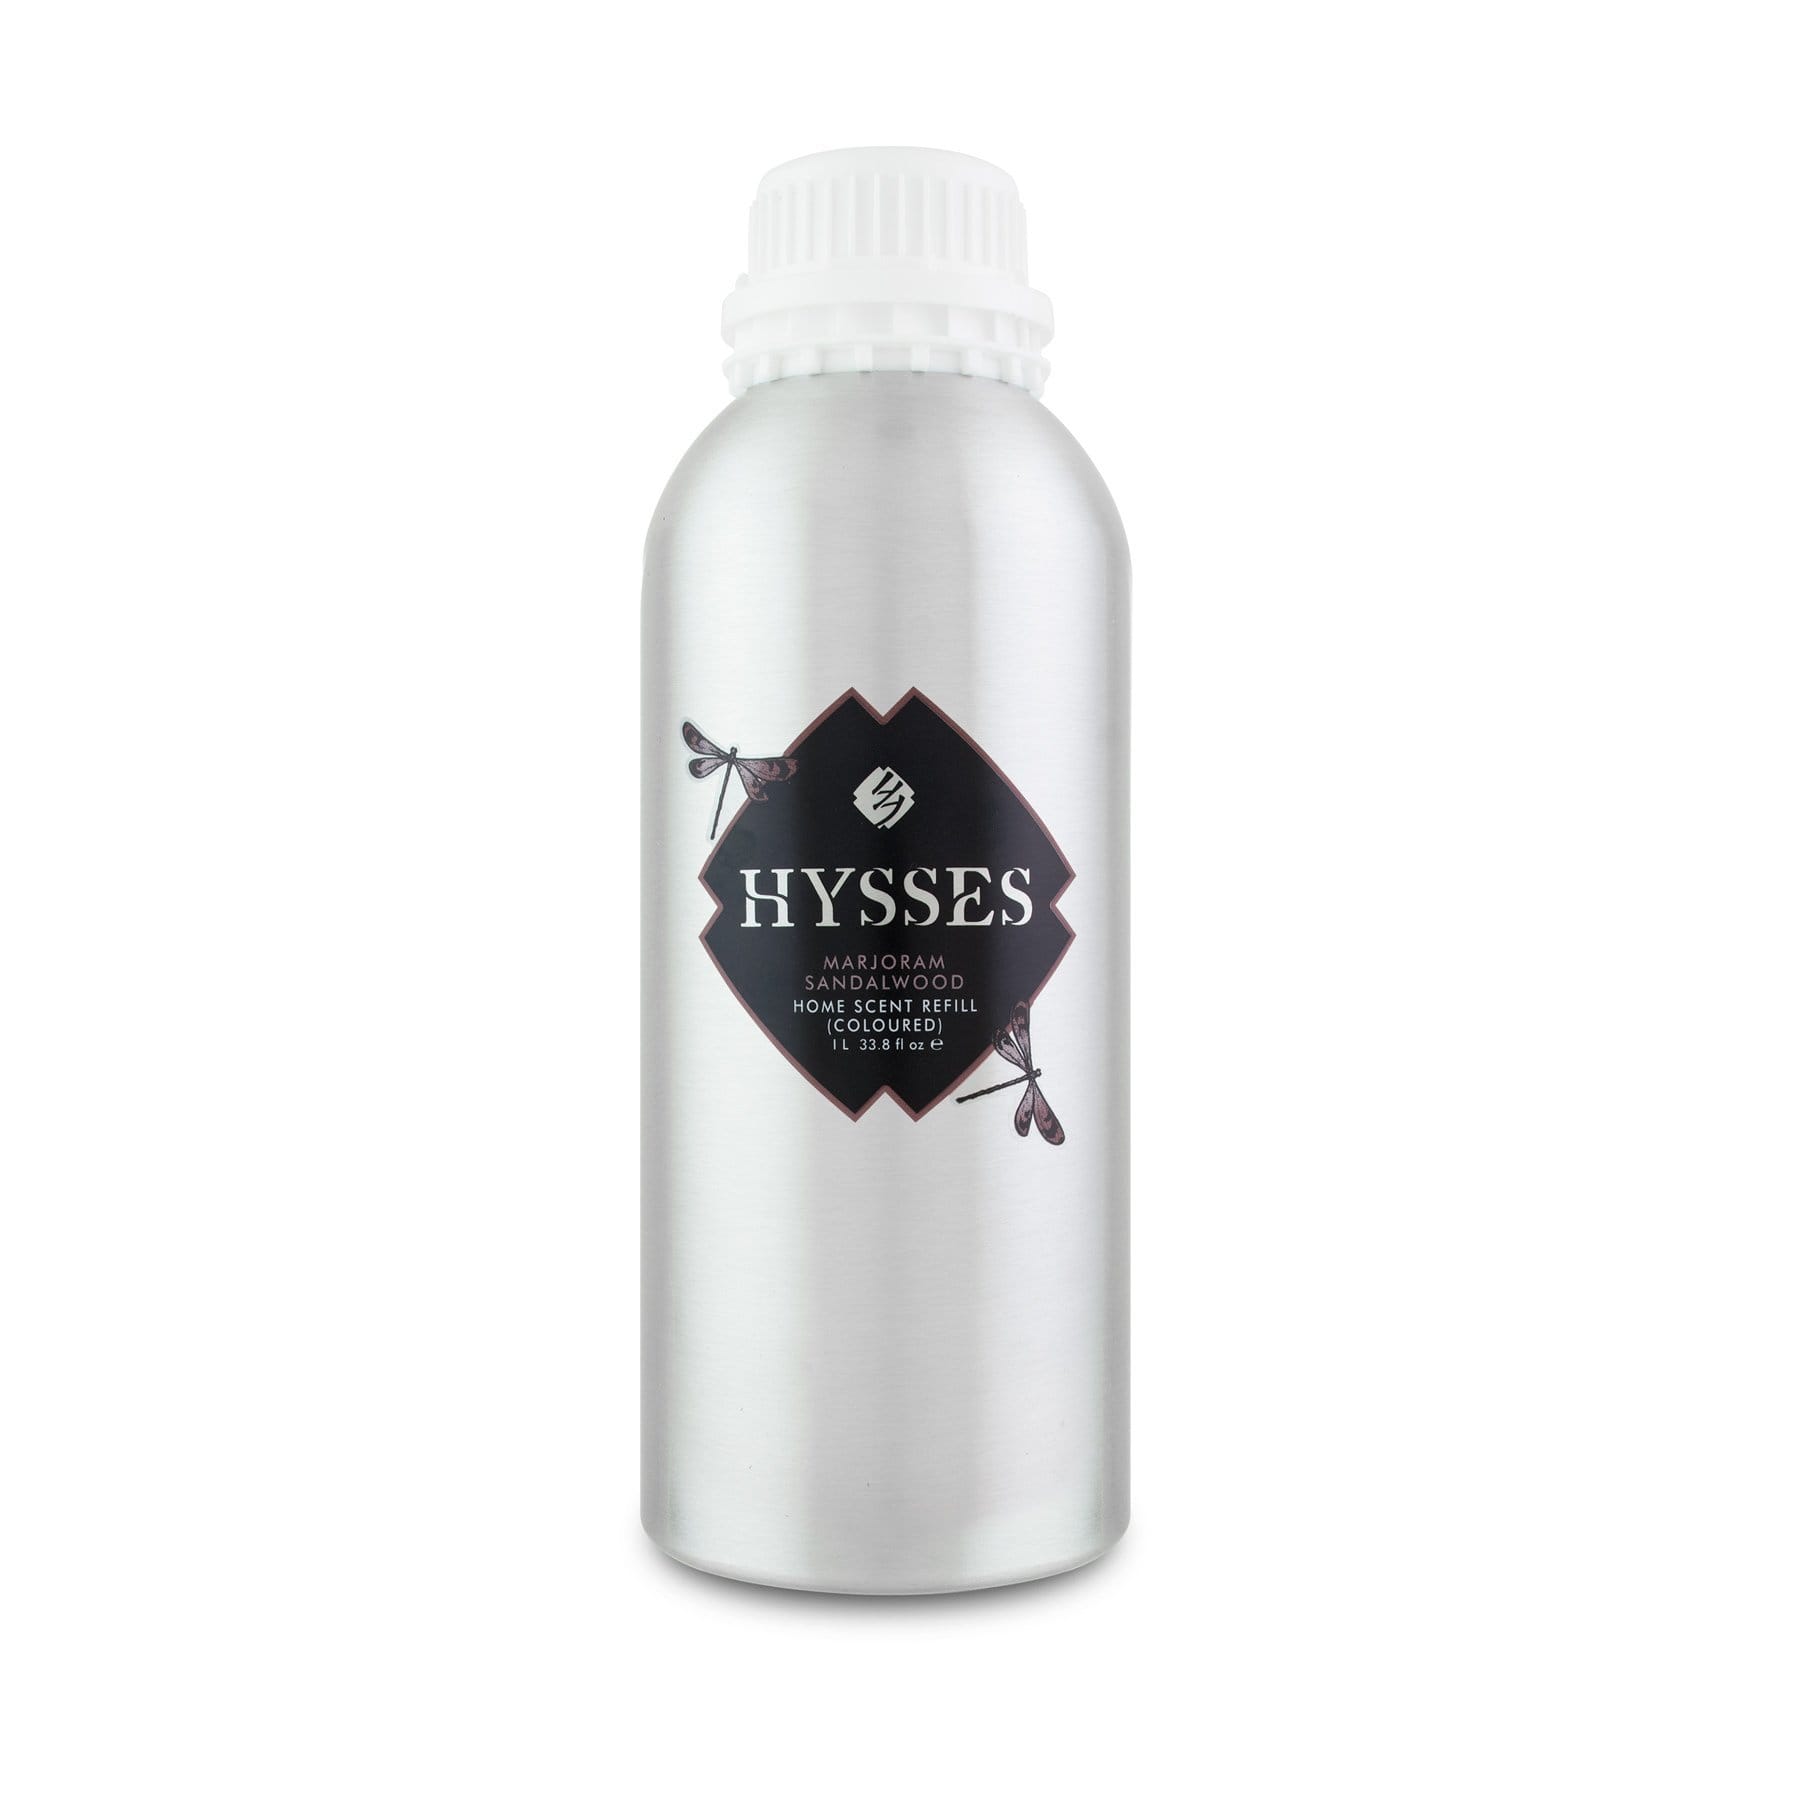 Hysses Home Scents 500ml Refill Home Scent  Marjoram Sandalwood (Green Coloured)